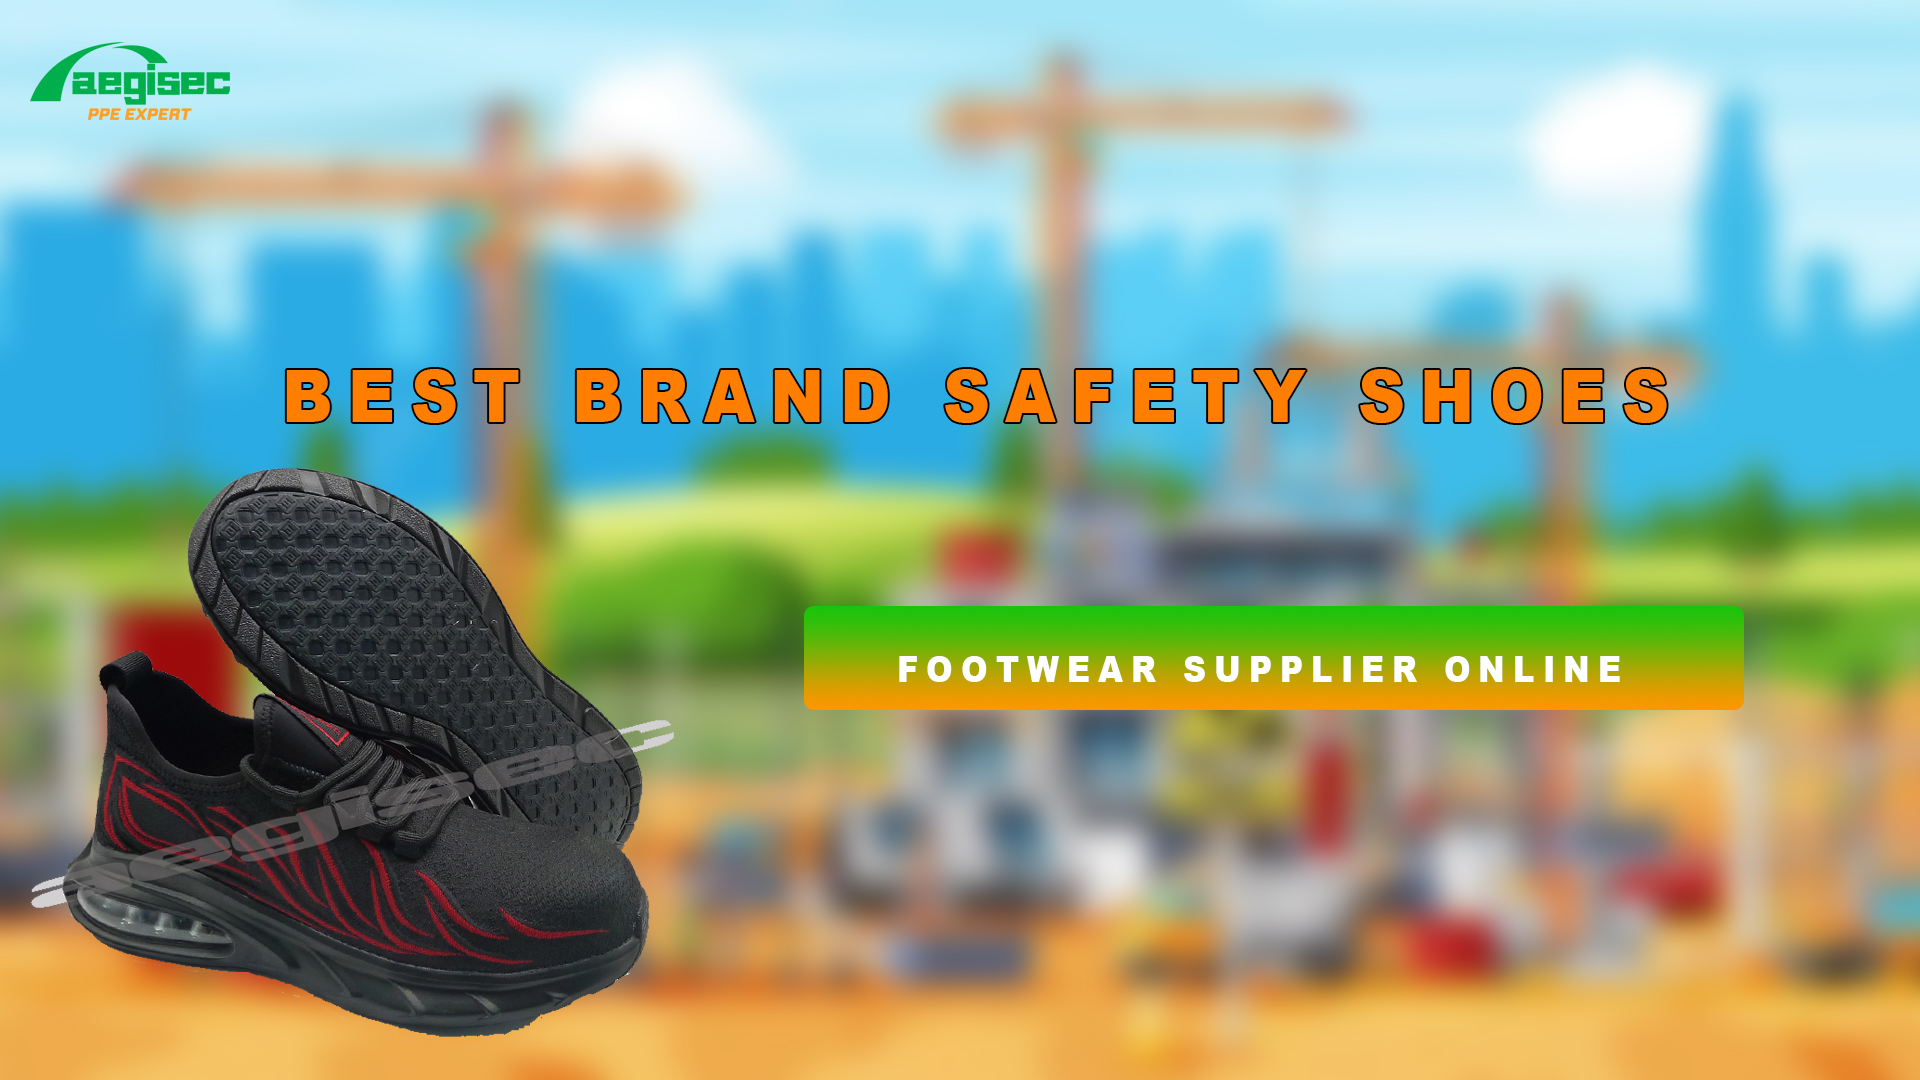 What Is The Best Brand Of Safety Shoes